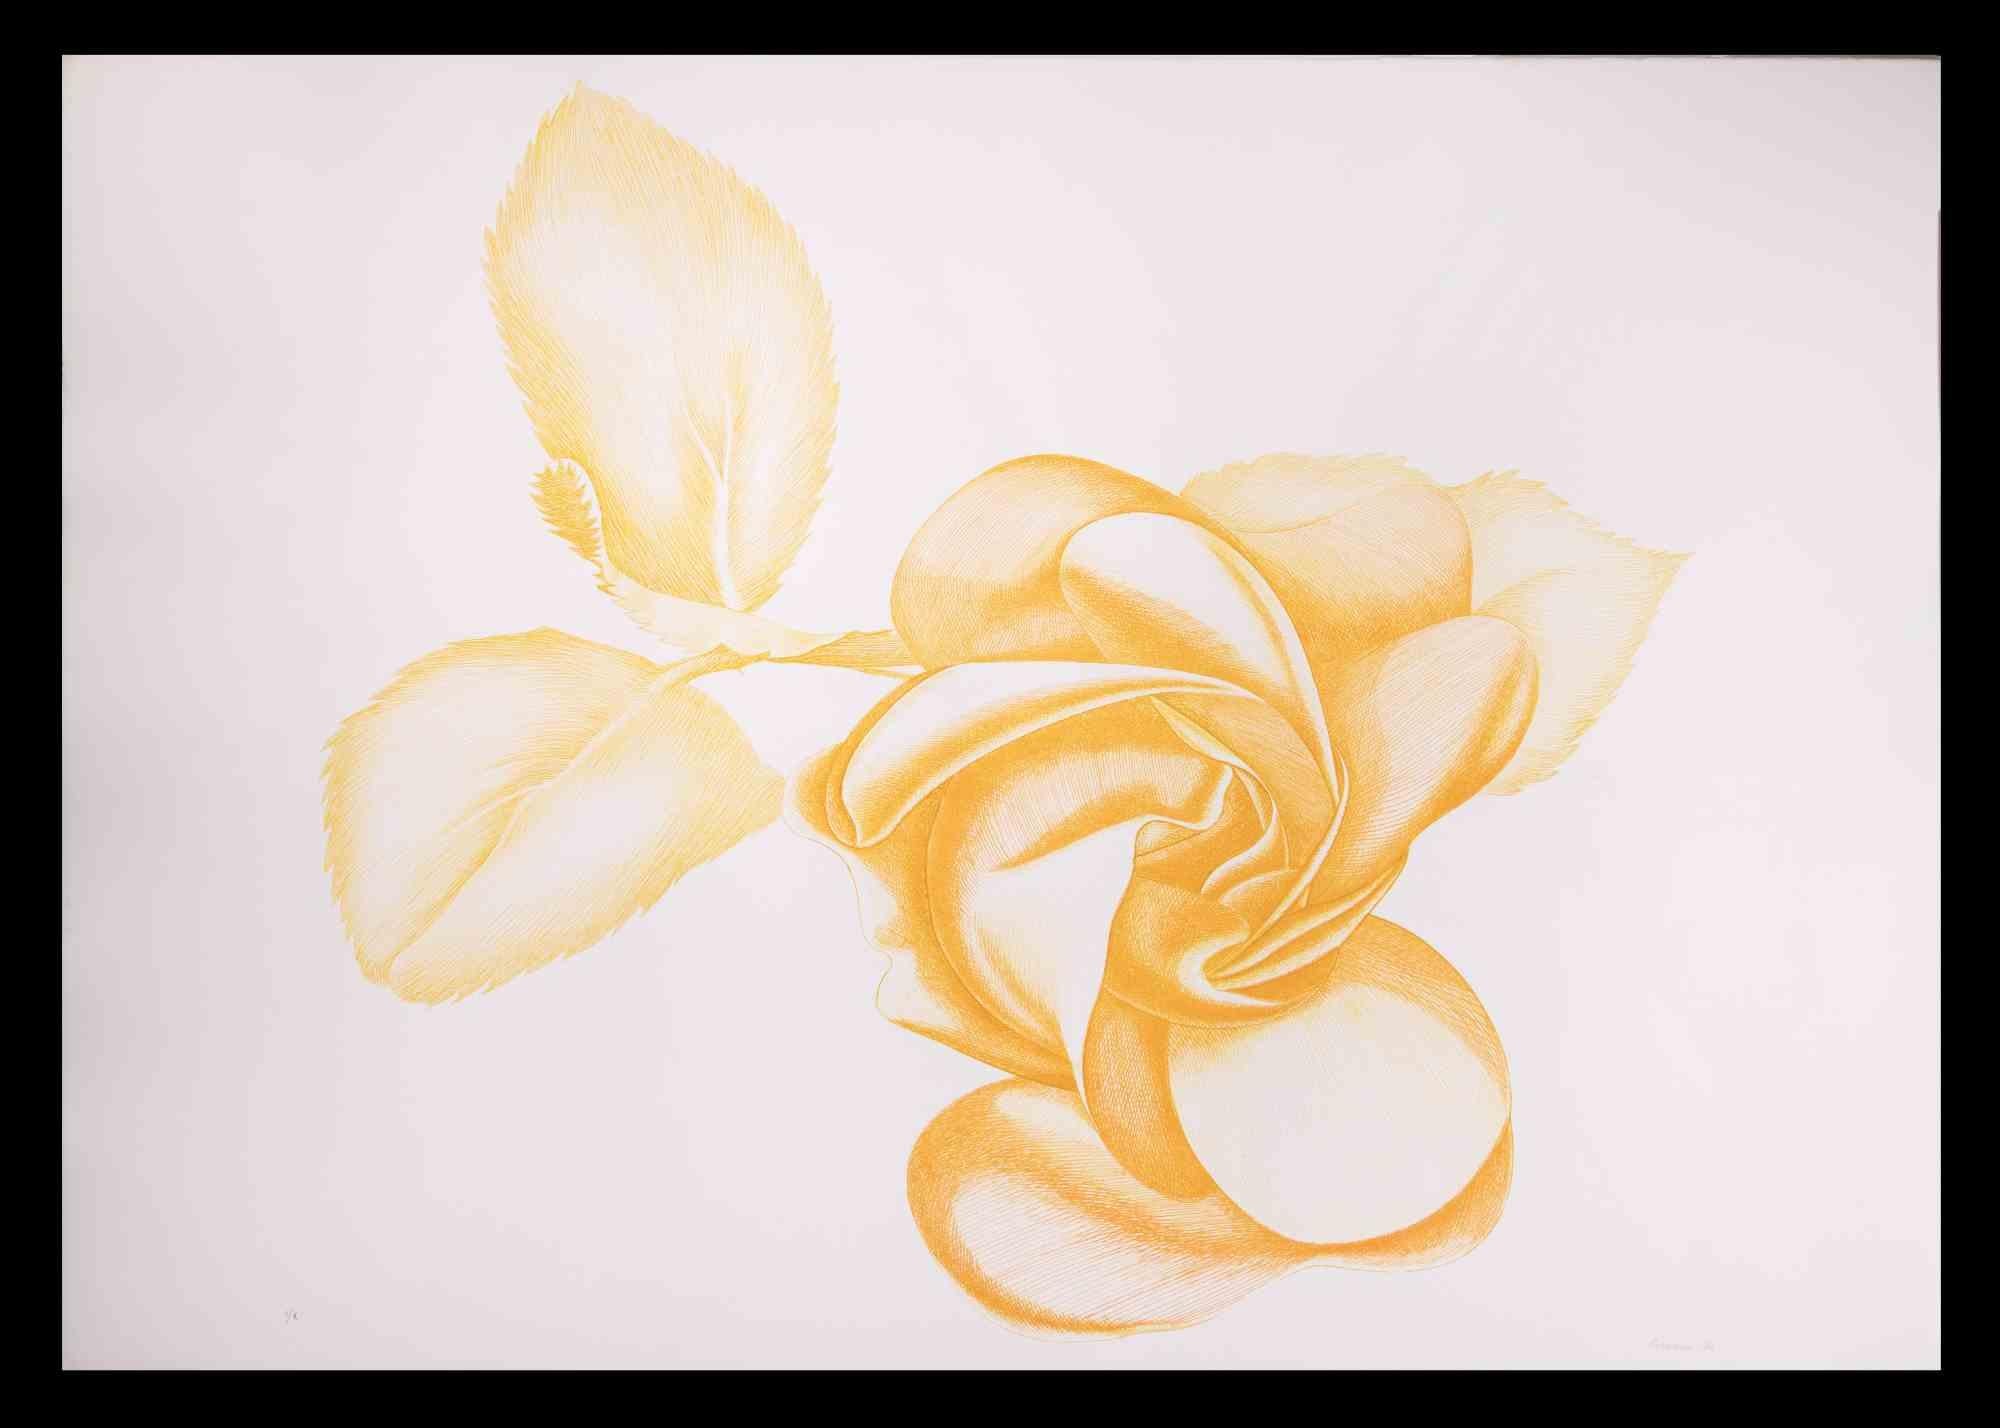 Yellow Rose is a modern artwork realized by the Italian artist Giacomo Porzano (1925-2006) in 1972.

Mixed colored etching.

Hand-signed and dated on the lower right. Edition I/X



Giacomo Porzano was born in Lerici on November 21, 1925 and died in